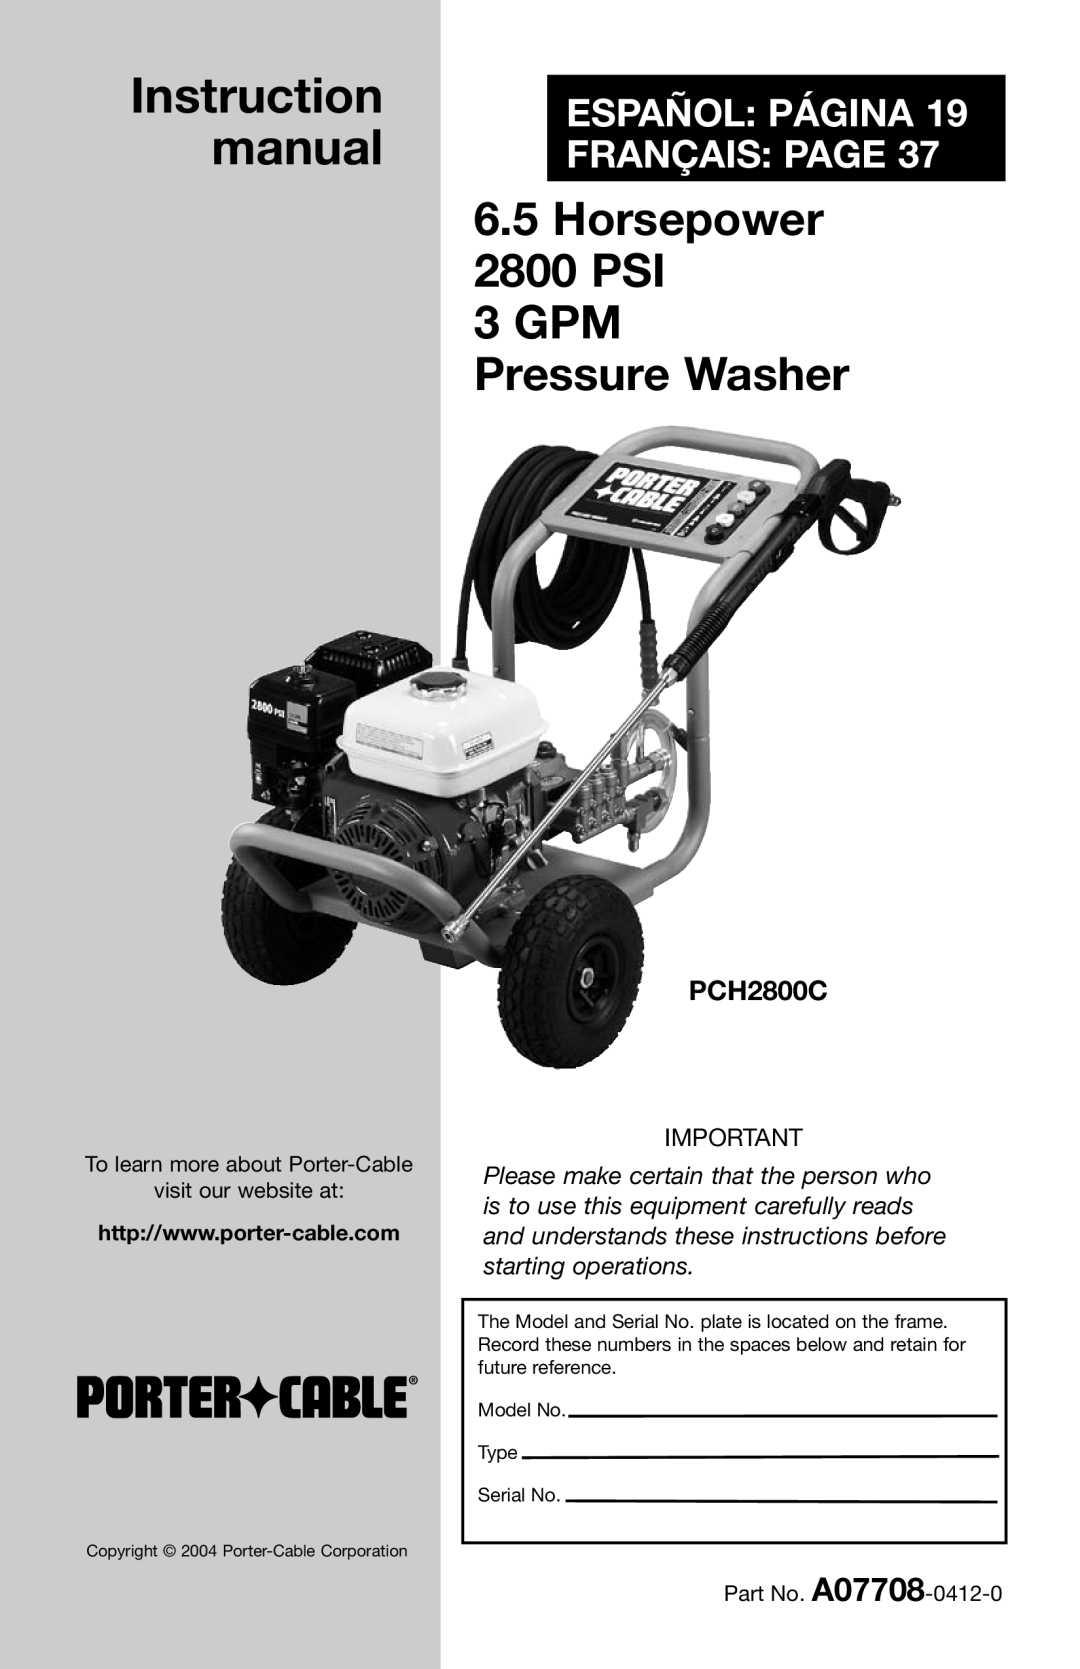 Porter-Cable A07708-0412-0 instruction manual PCH2800C, 6.5Horsepower 2800 PSI 3 GPM Pressure Washer 